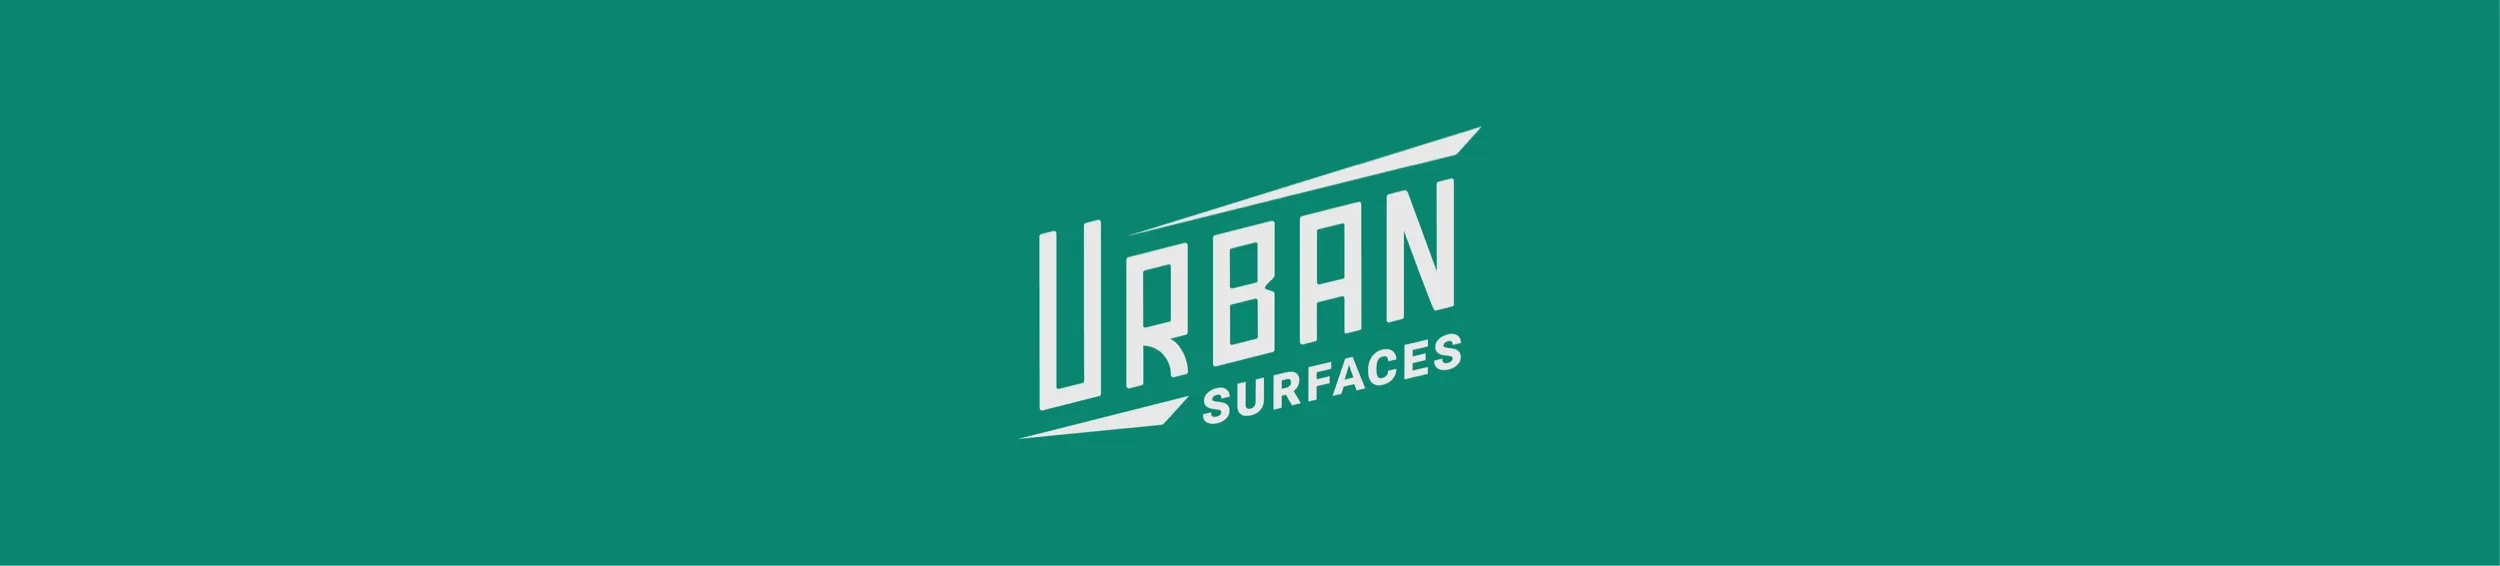 Urban Surfaces logo on teal background.